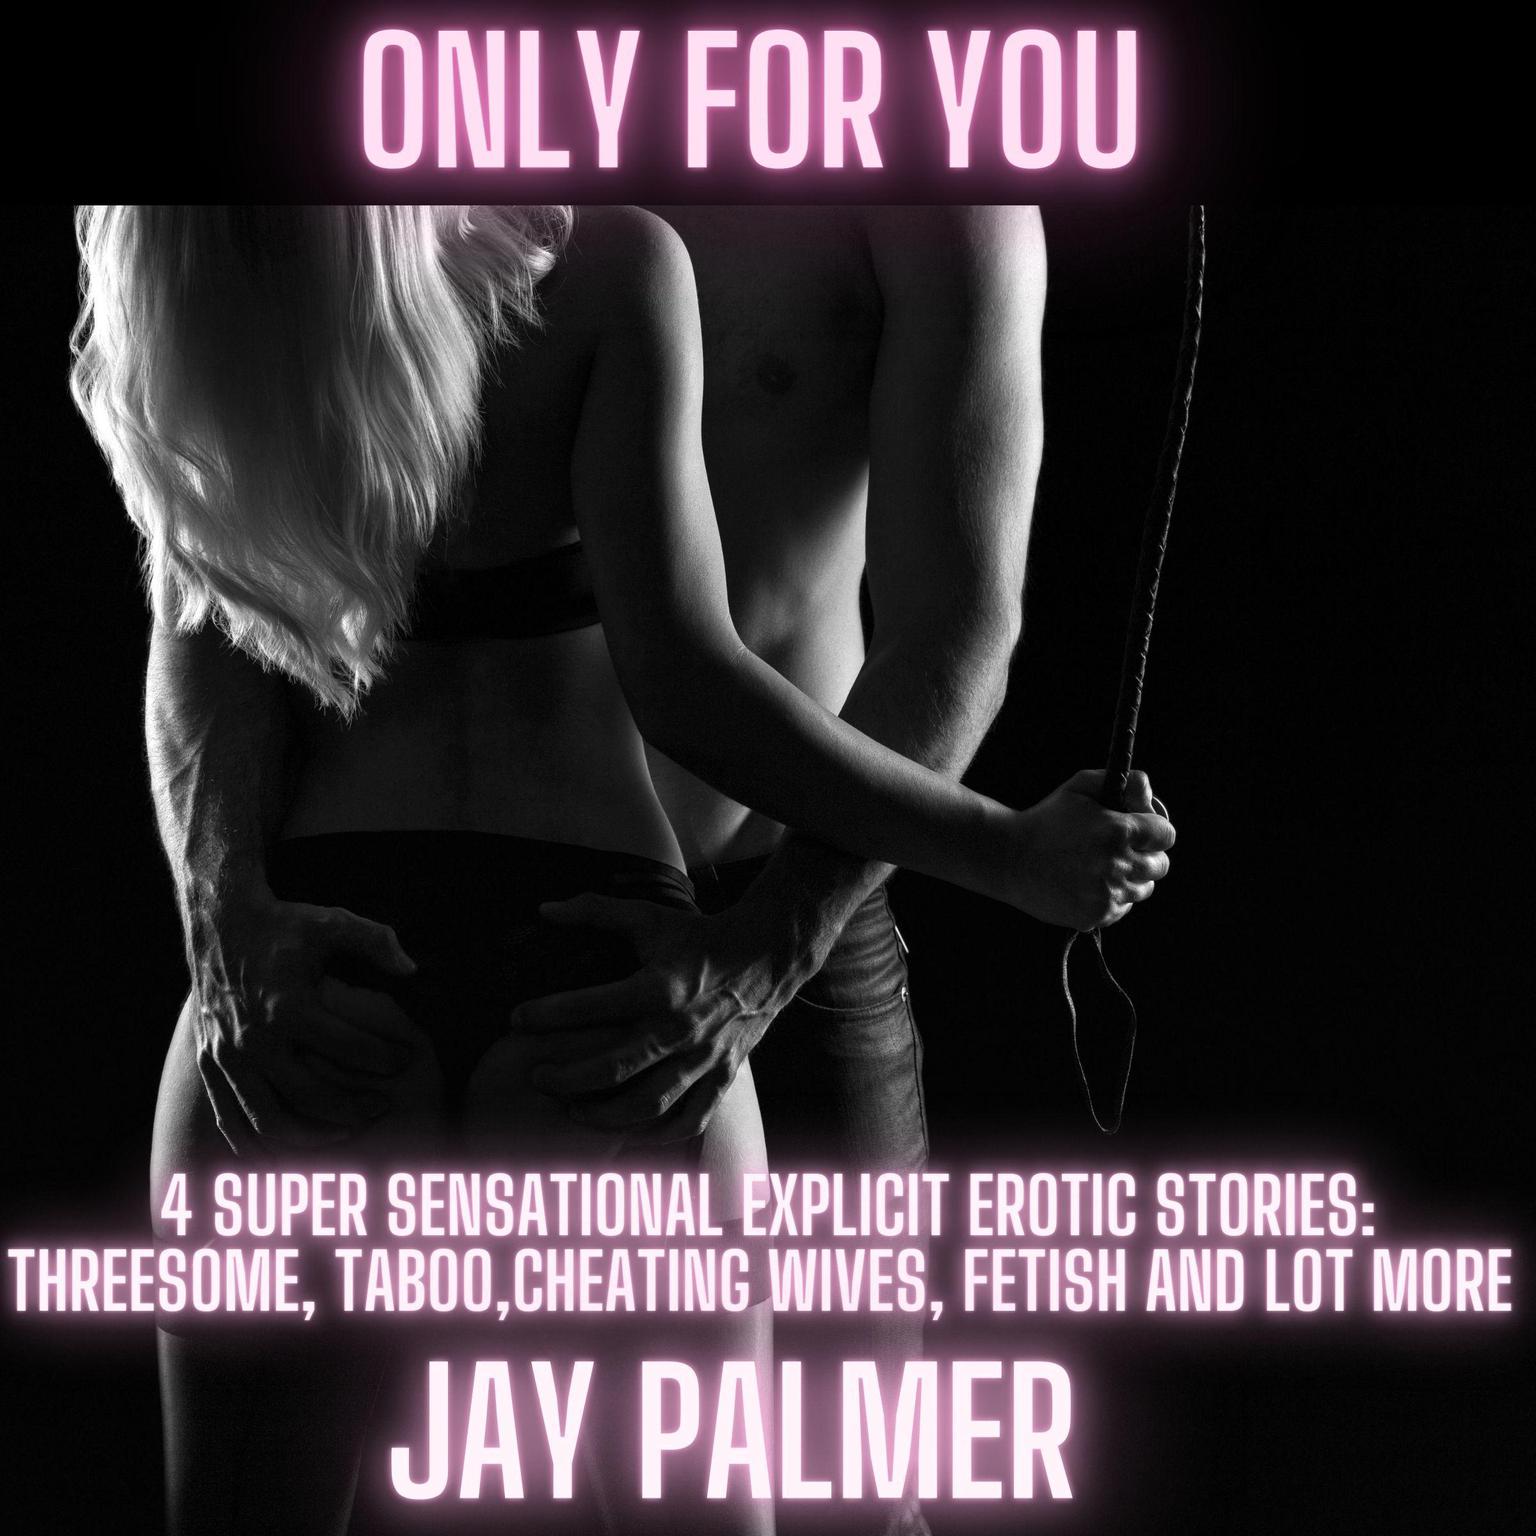 ONLY FOR YOU: 4 super sensational explicit erotic stories - Threesome, Taboo, cheating wives, fetish and lot more. Audiobook, by Jay Palmer